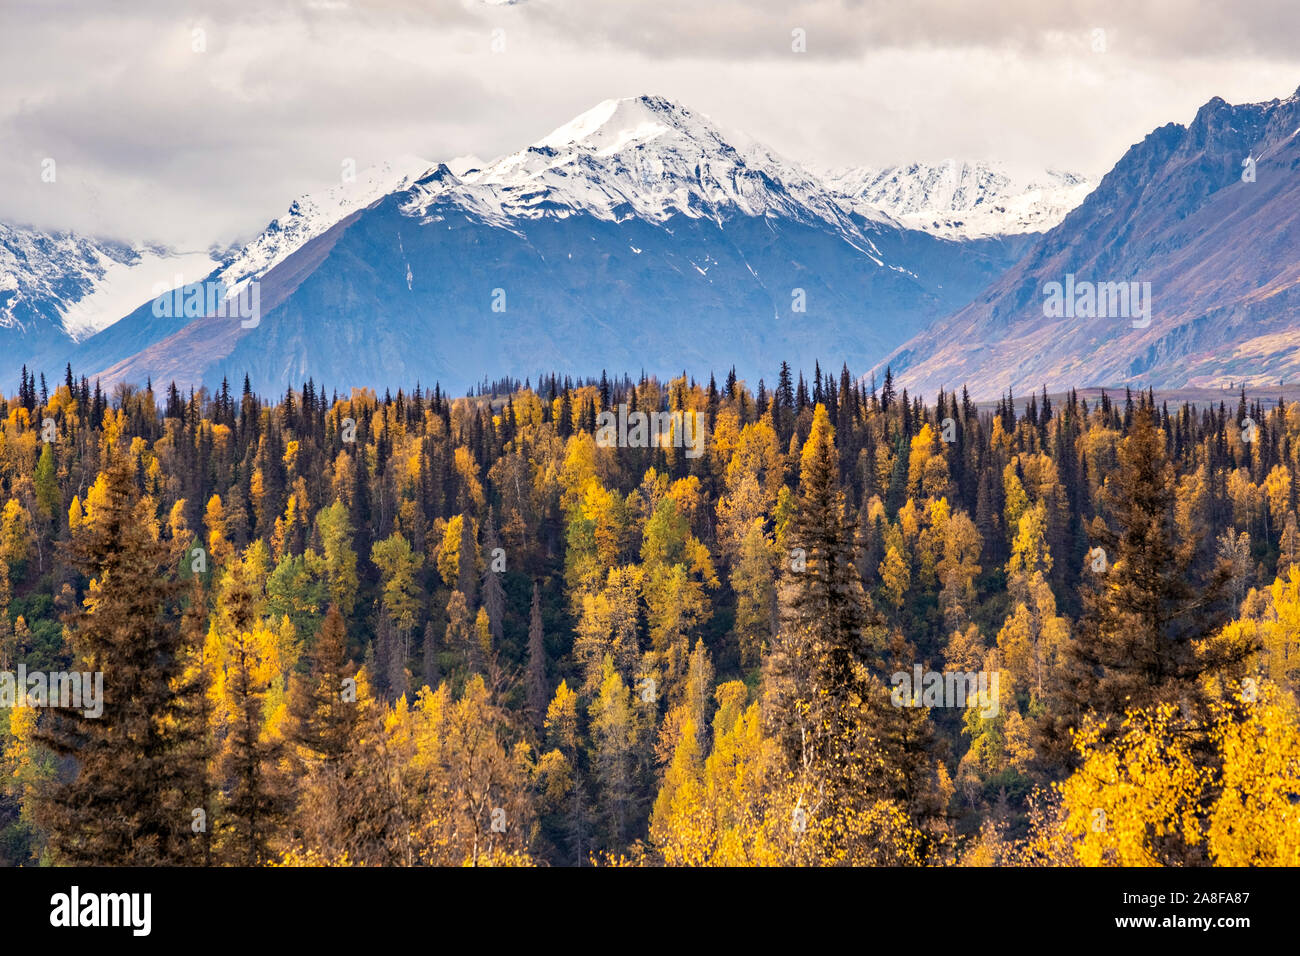 Termination dust, early snow, falls over the Alaska Range of mountains along the East Fork Chulitna River in Denali State Park near Cantwell, Alaska Stock Photo